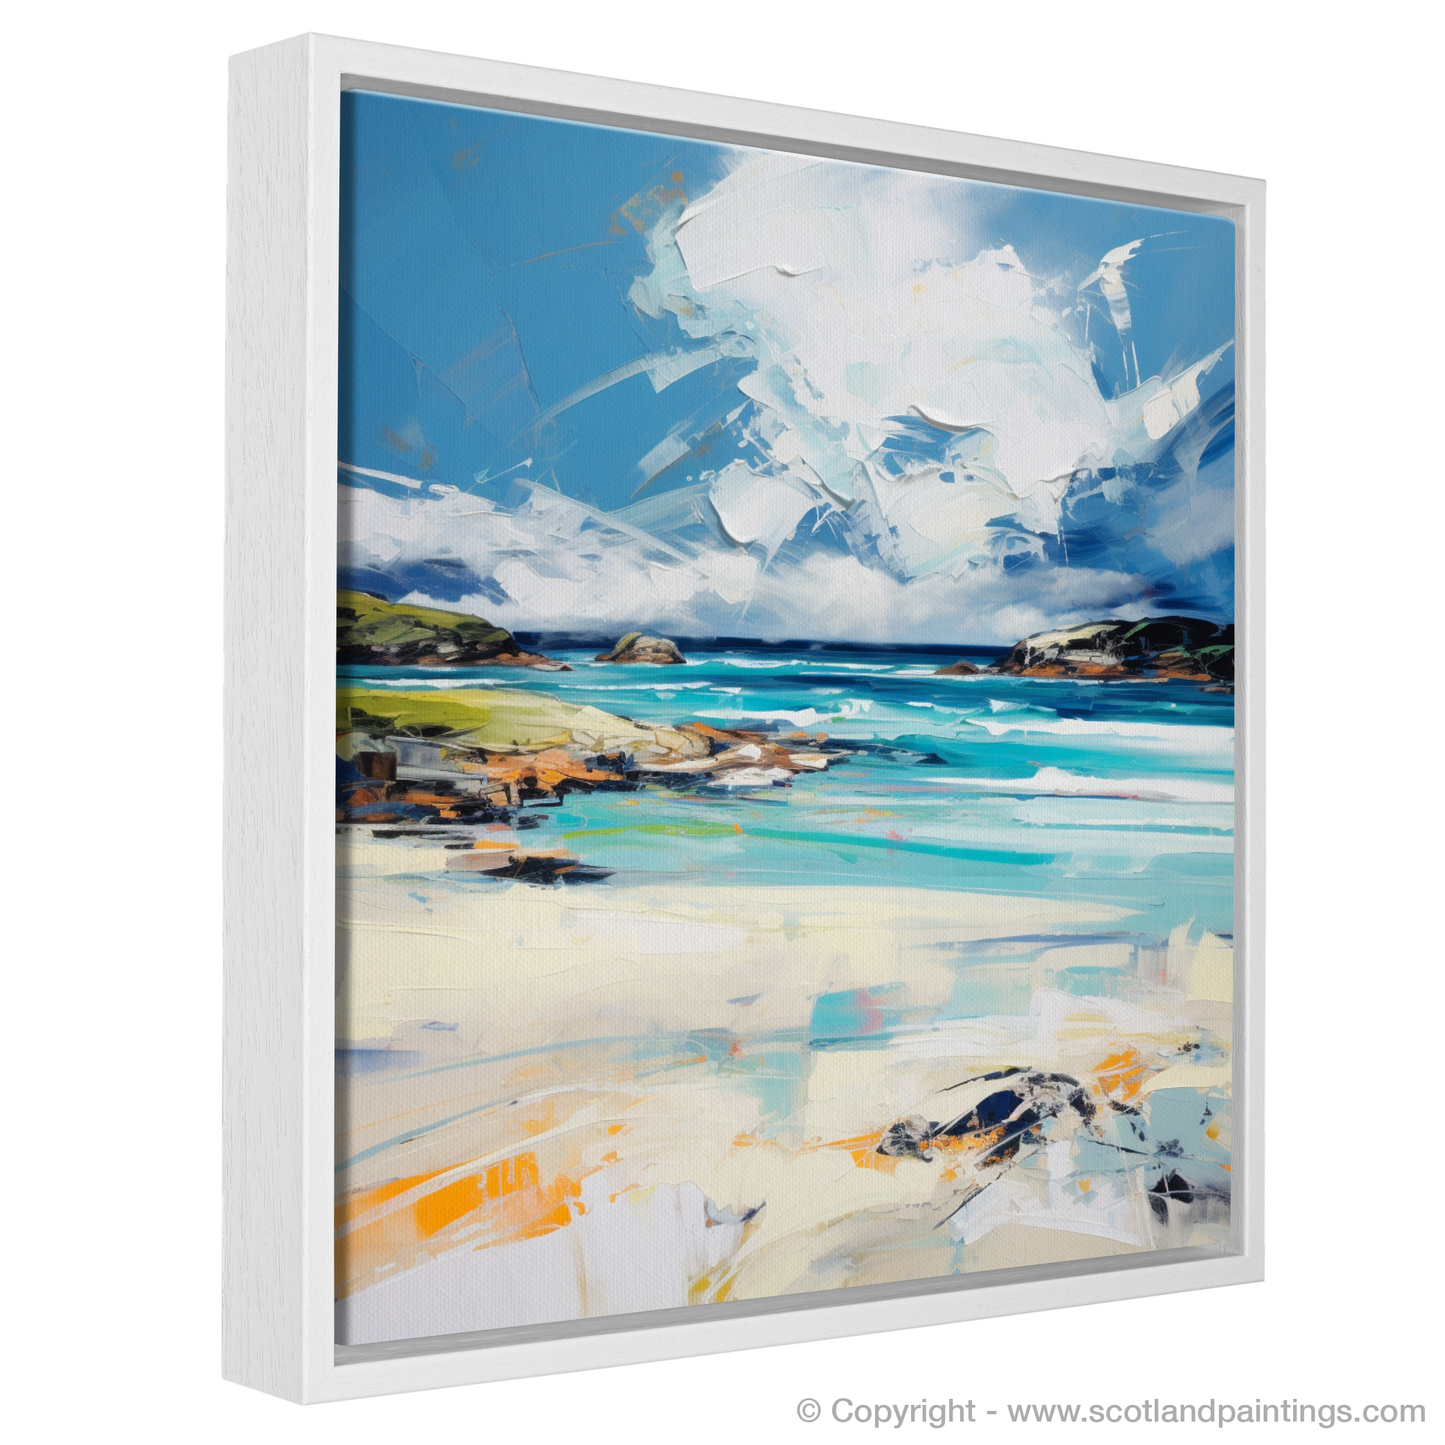 Painting and Art Print of Camusdarach Beach entitled "Expressionist Ode to Camusdarach Beach".